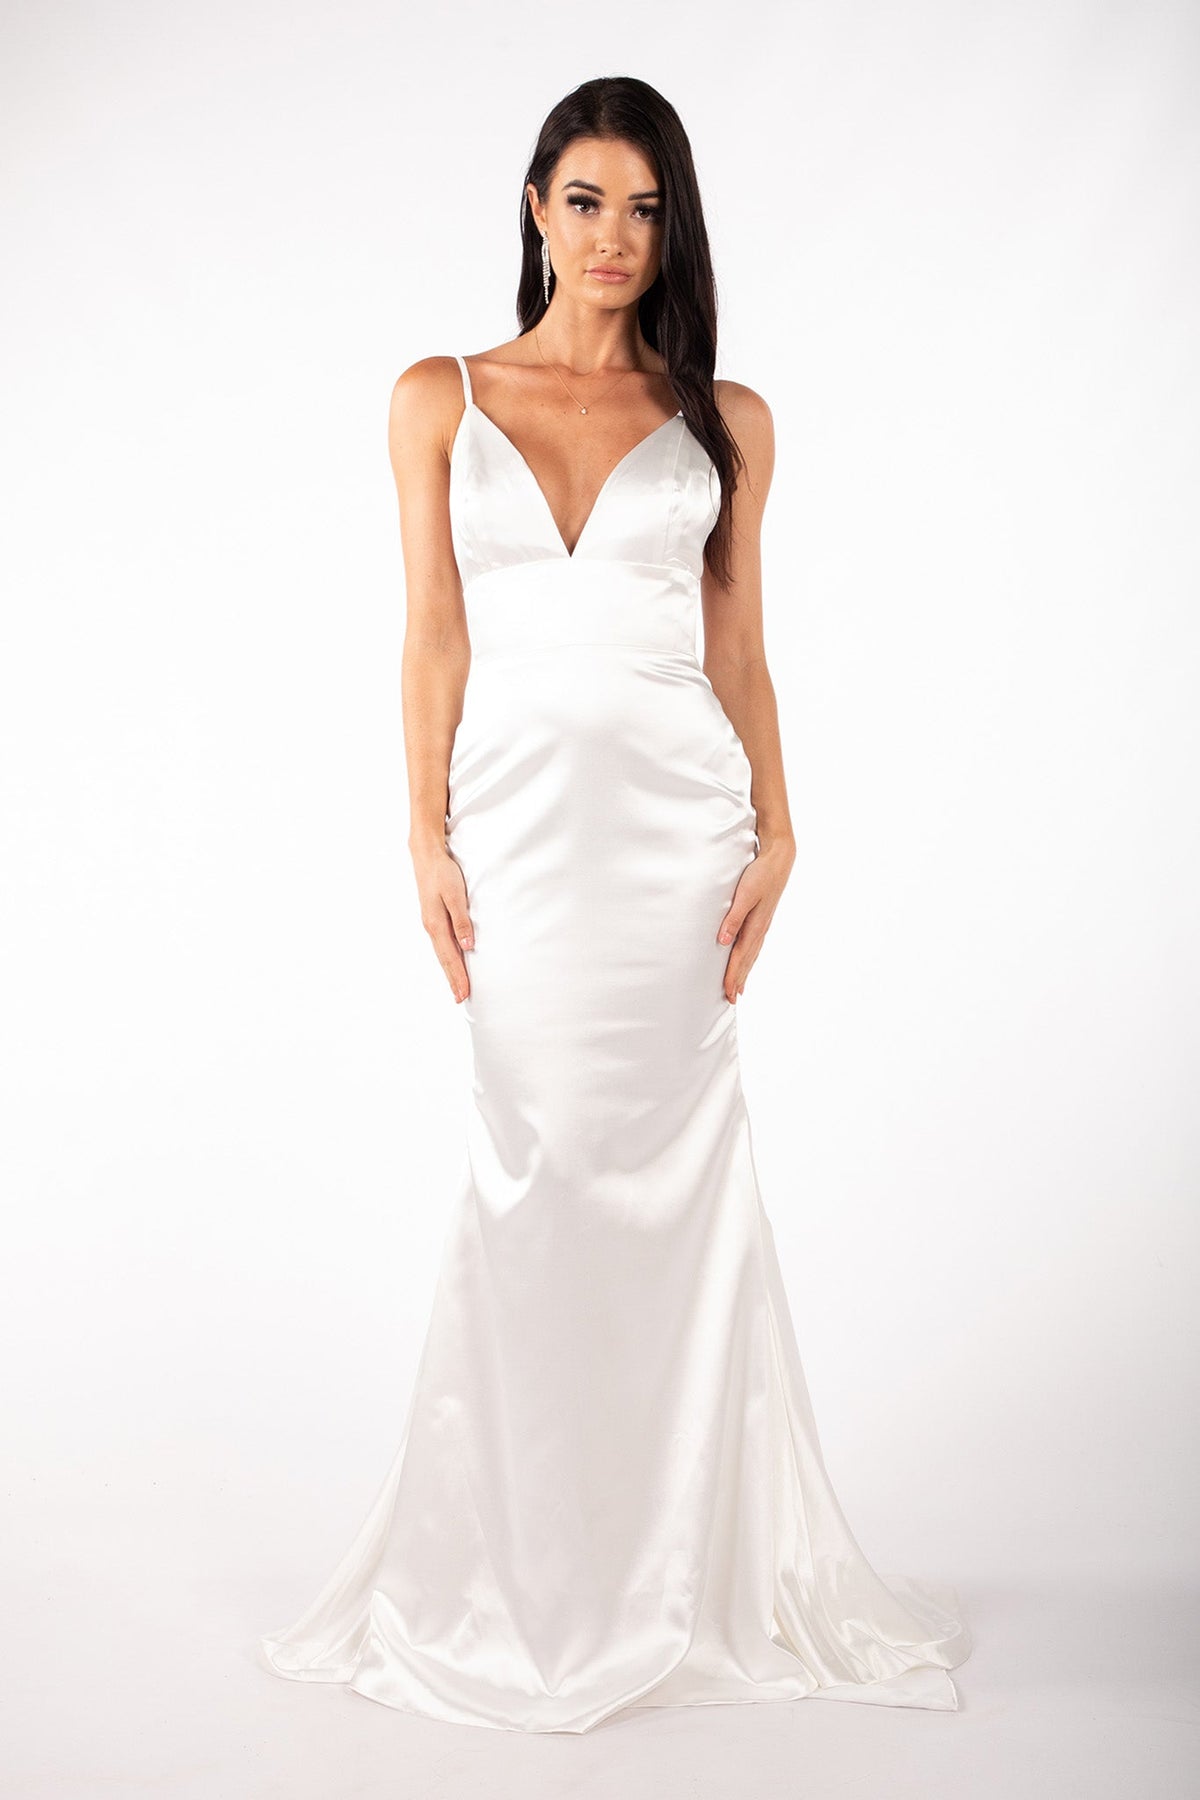 Ivory White Satin Full Length Mermaid Evening Gown with V Neck, Backless Design and Sweep Train